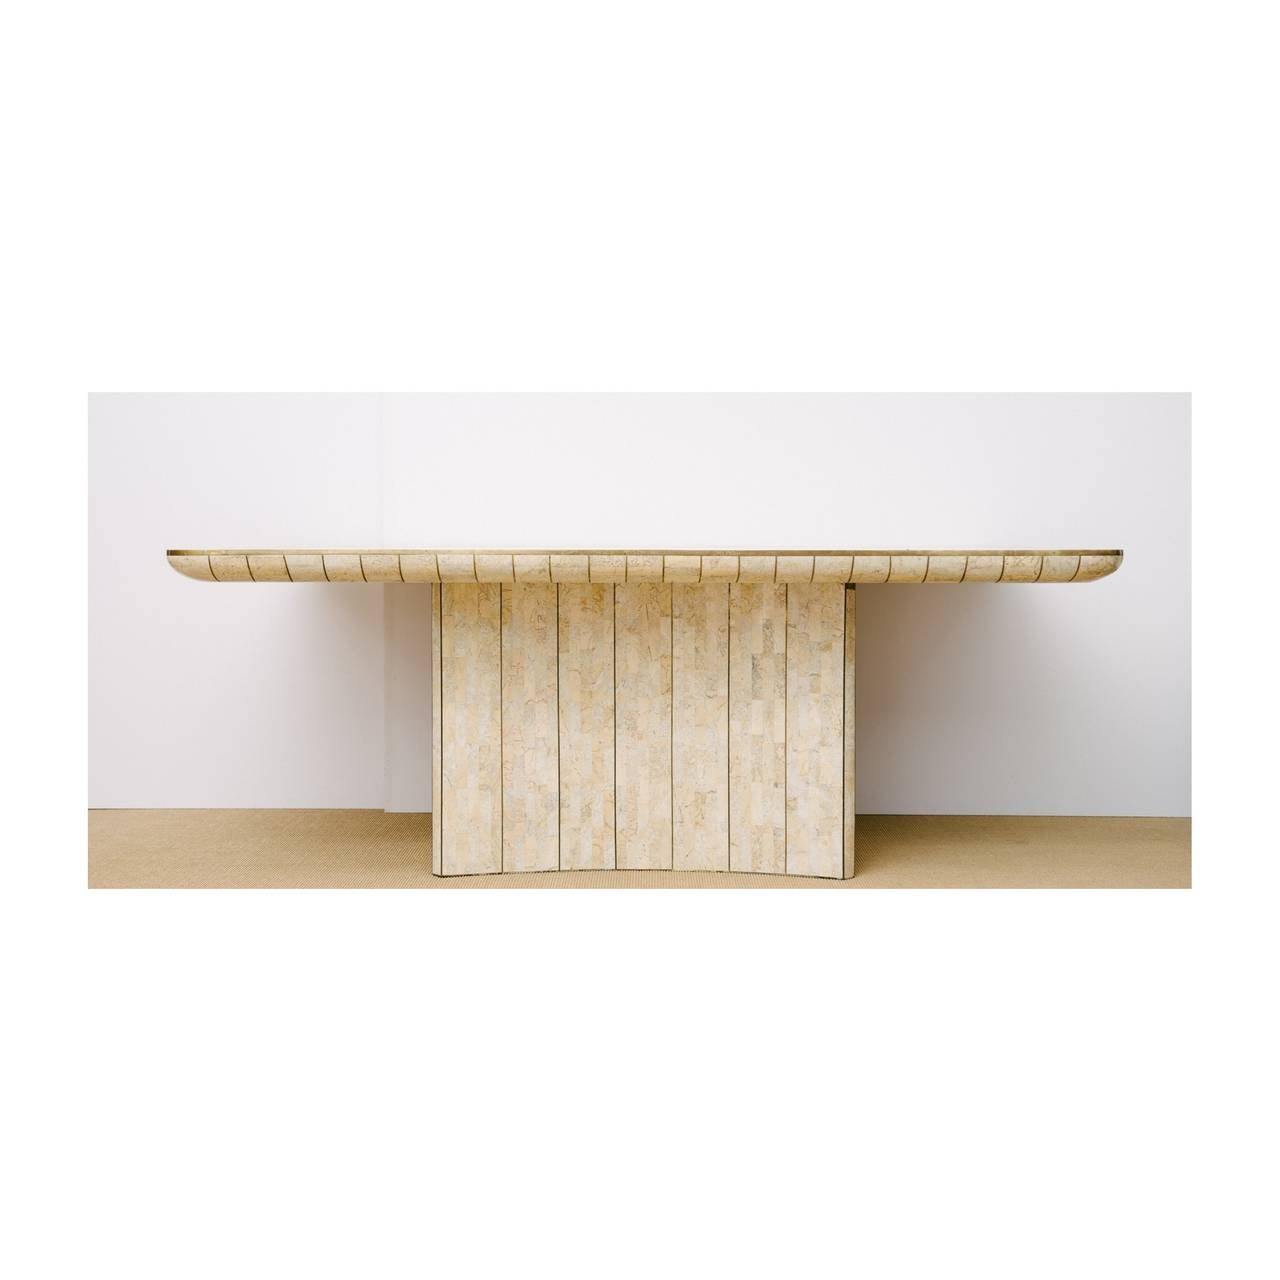 Maitland Smith tessellated dining table.